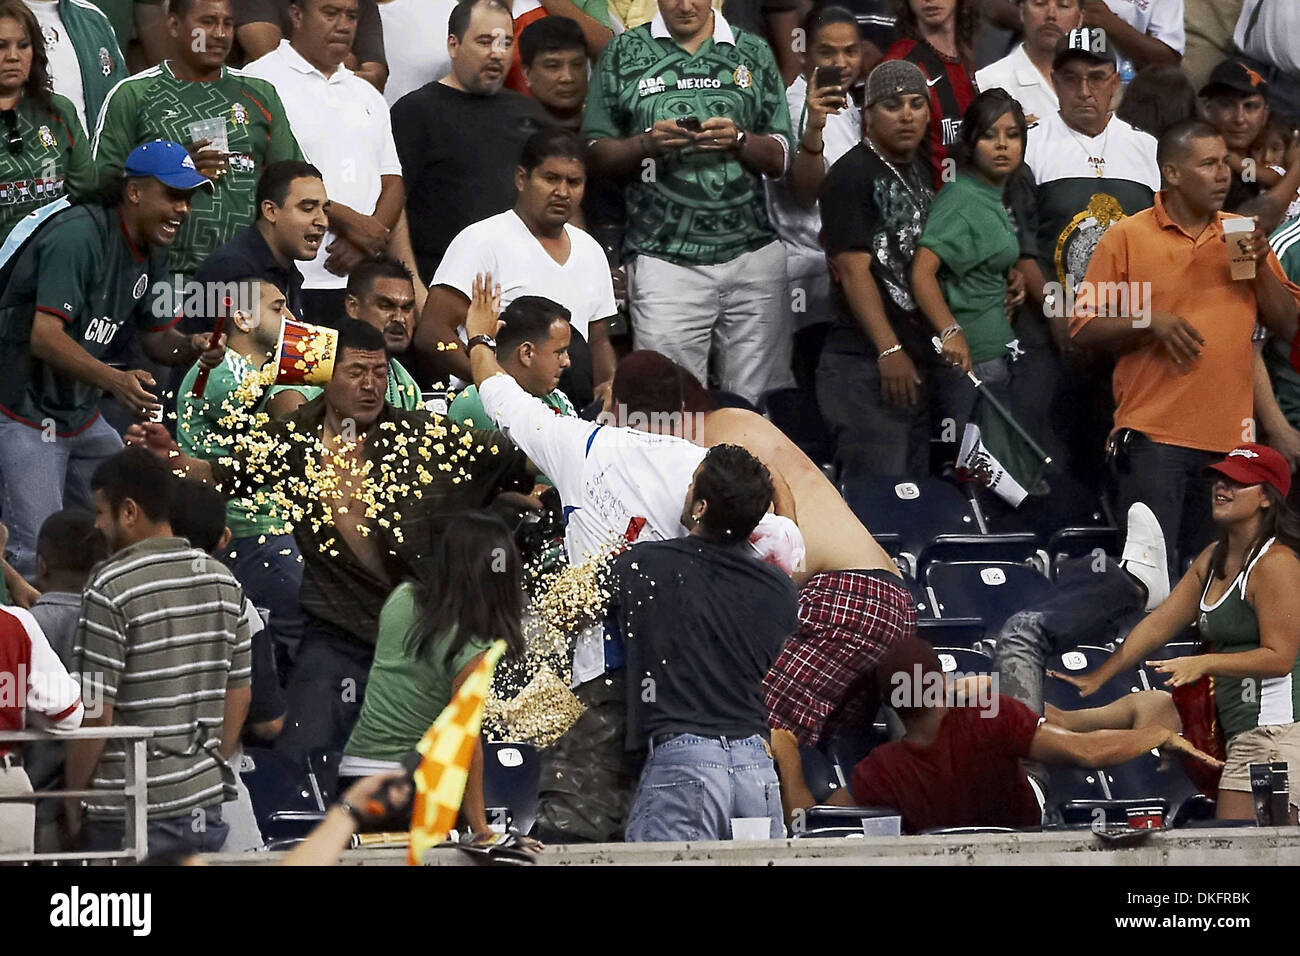 Jul 10, 2009 - Houston, Texas, USA - Fans fight in the stands late in the second half, reflecting an increasingly physical on-field game.  Panama and Mexico tied 1-1 at Reliant Stadium. (Credit Image: © Diana Porter/Southcreek Global/ZUMA Press) Stock Photo